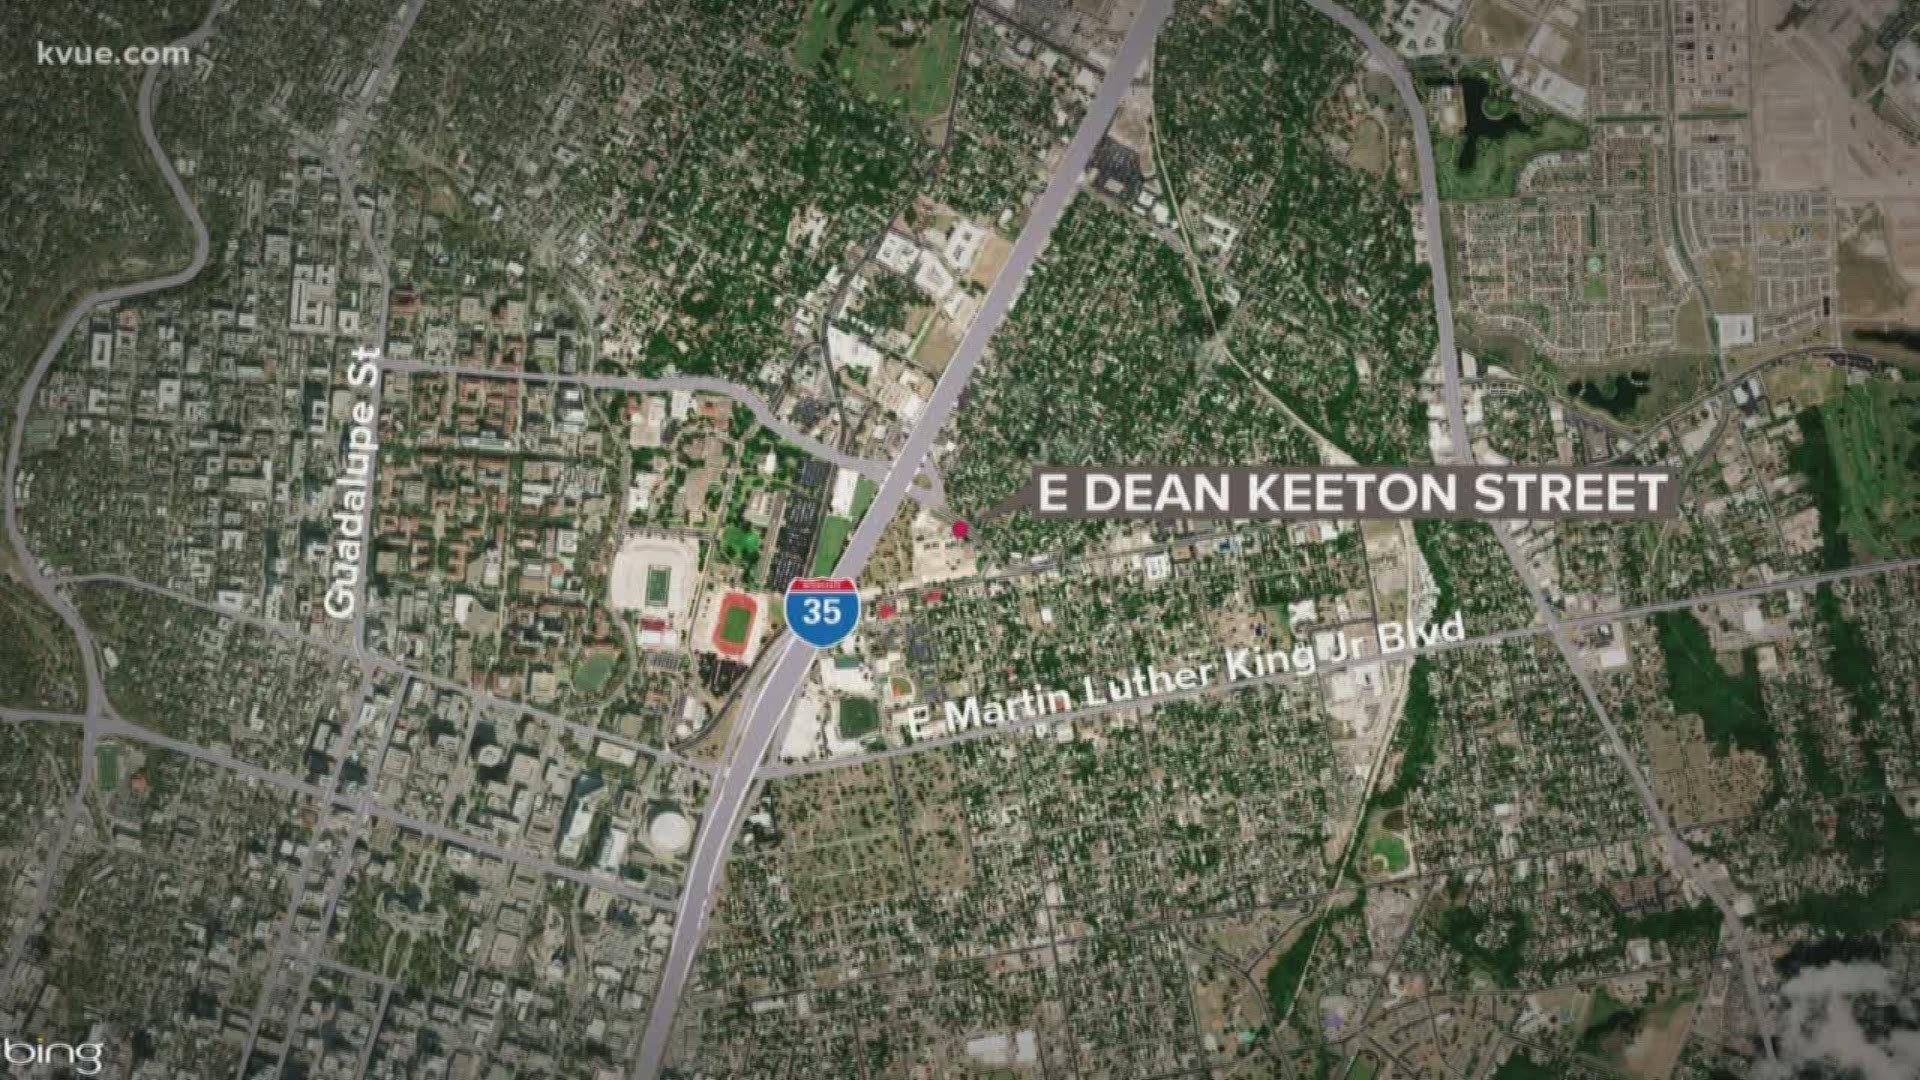 Police at the University of Texas are looking for someone who attacked an employee in a parking lot on East Dean Keeton Street.